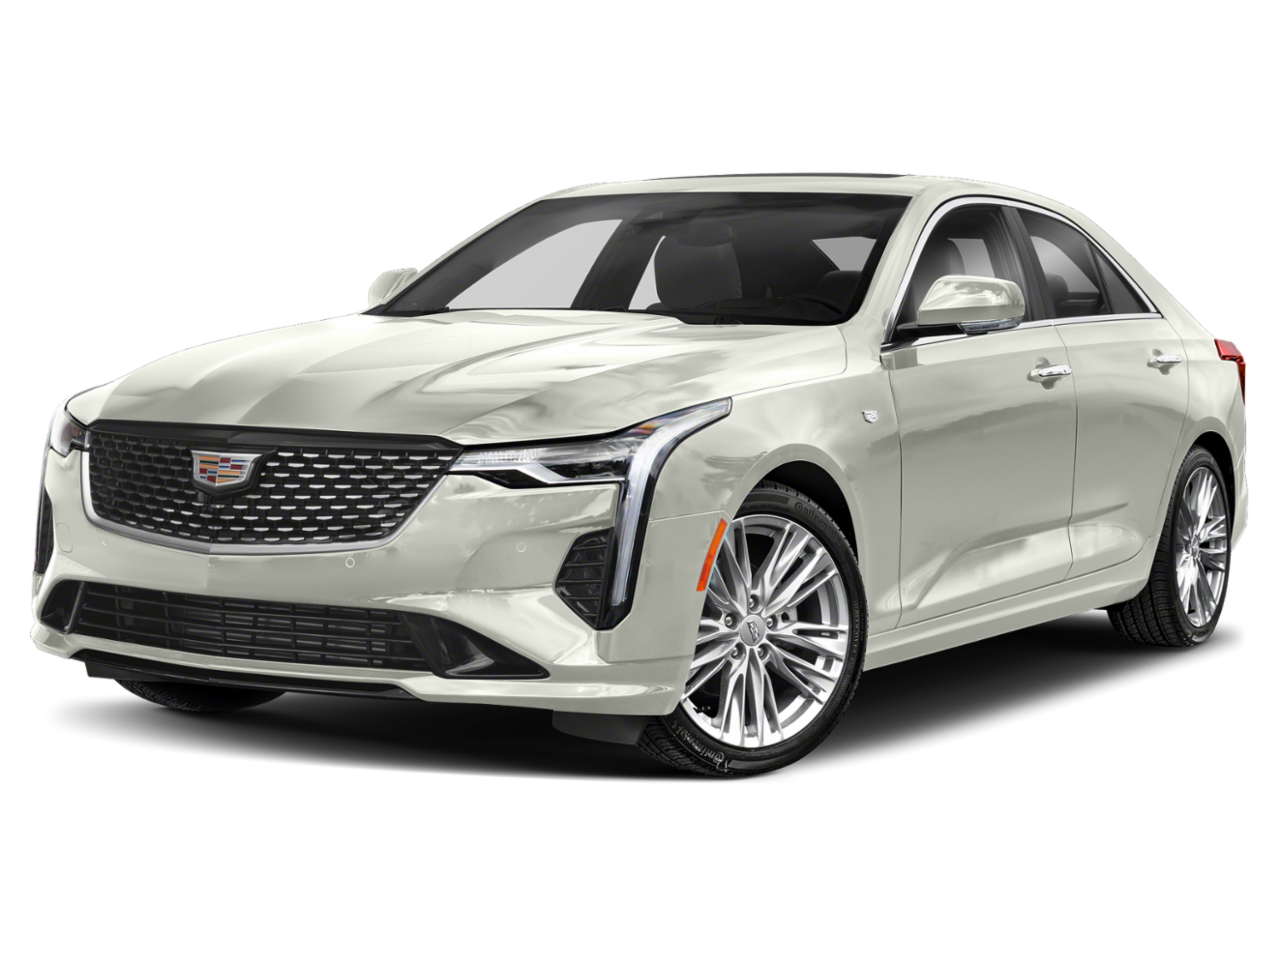 Ettleson Cadillac in HODGKINS | Serving Orland Park, Naperville and